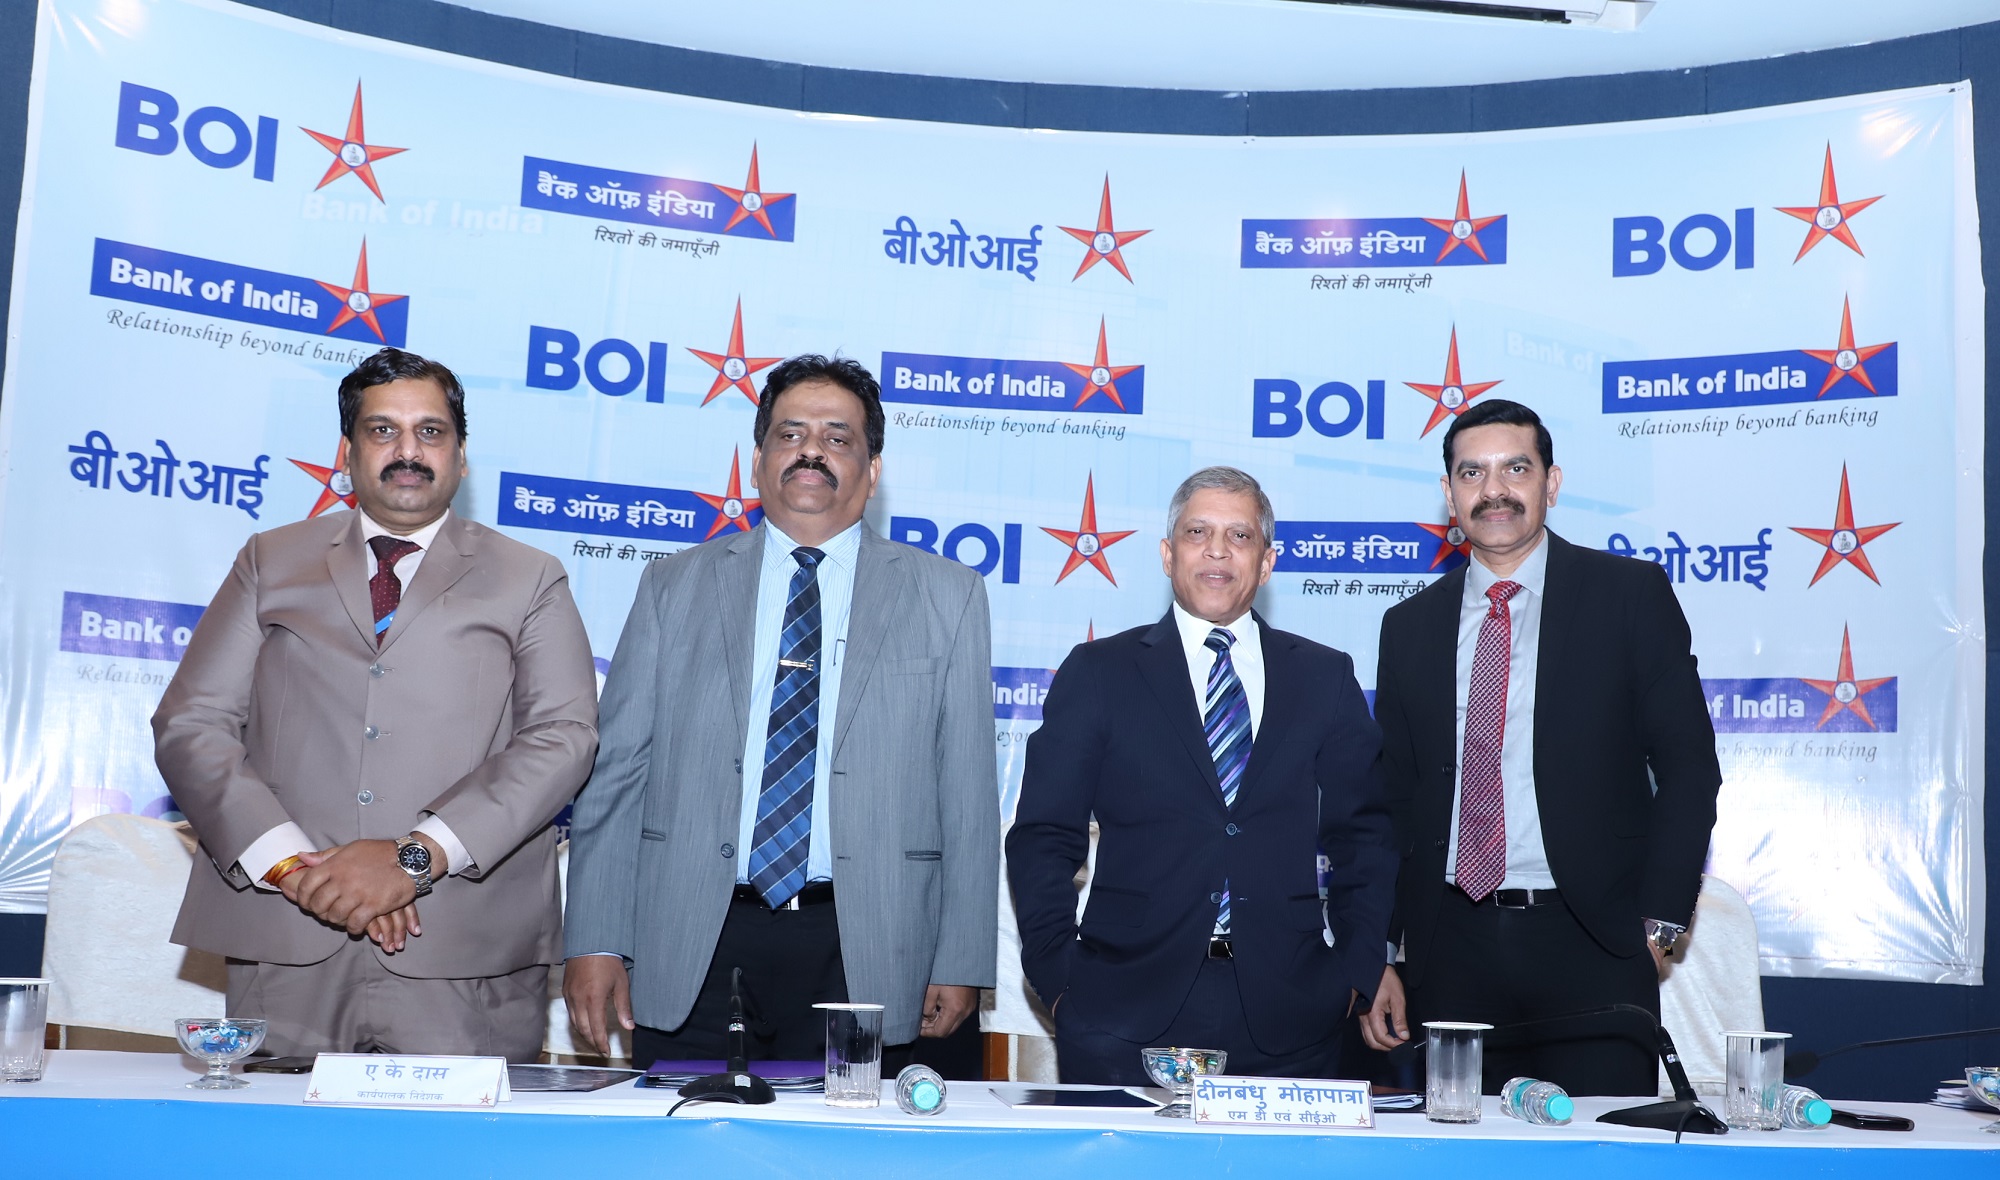 (L-R) Shri K.V.Raghavendra ( General Manager and CFO, Bank of India), Shri A.K. Das ( Executive Director, Bank of India), Shri Dinabandhu Mohapatra (Managing Director and Chief Executive Officer, Bank of India), Shri C.G. Chaitanya ( Executive Director, Bank of India)  at the announcement of the Banks Q3 FY19 Financial Results - Photo By Sachin Murdeshwar GPN News Network 